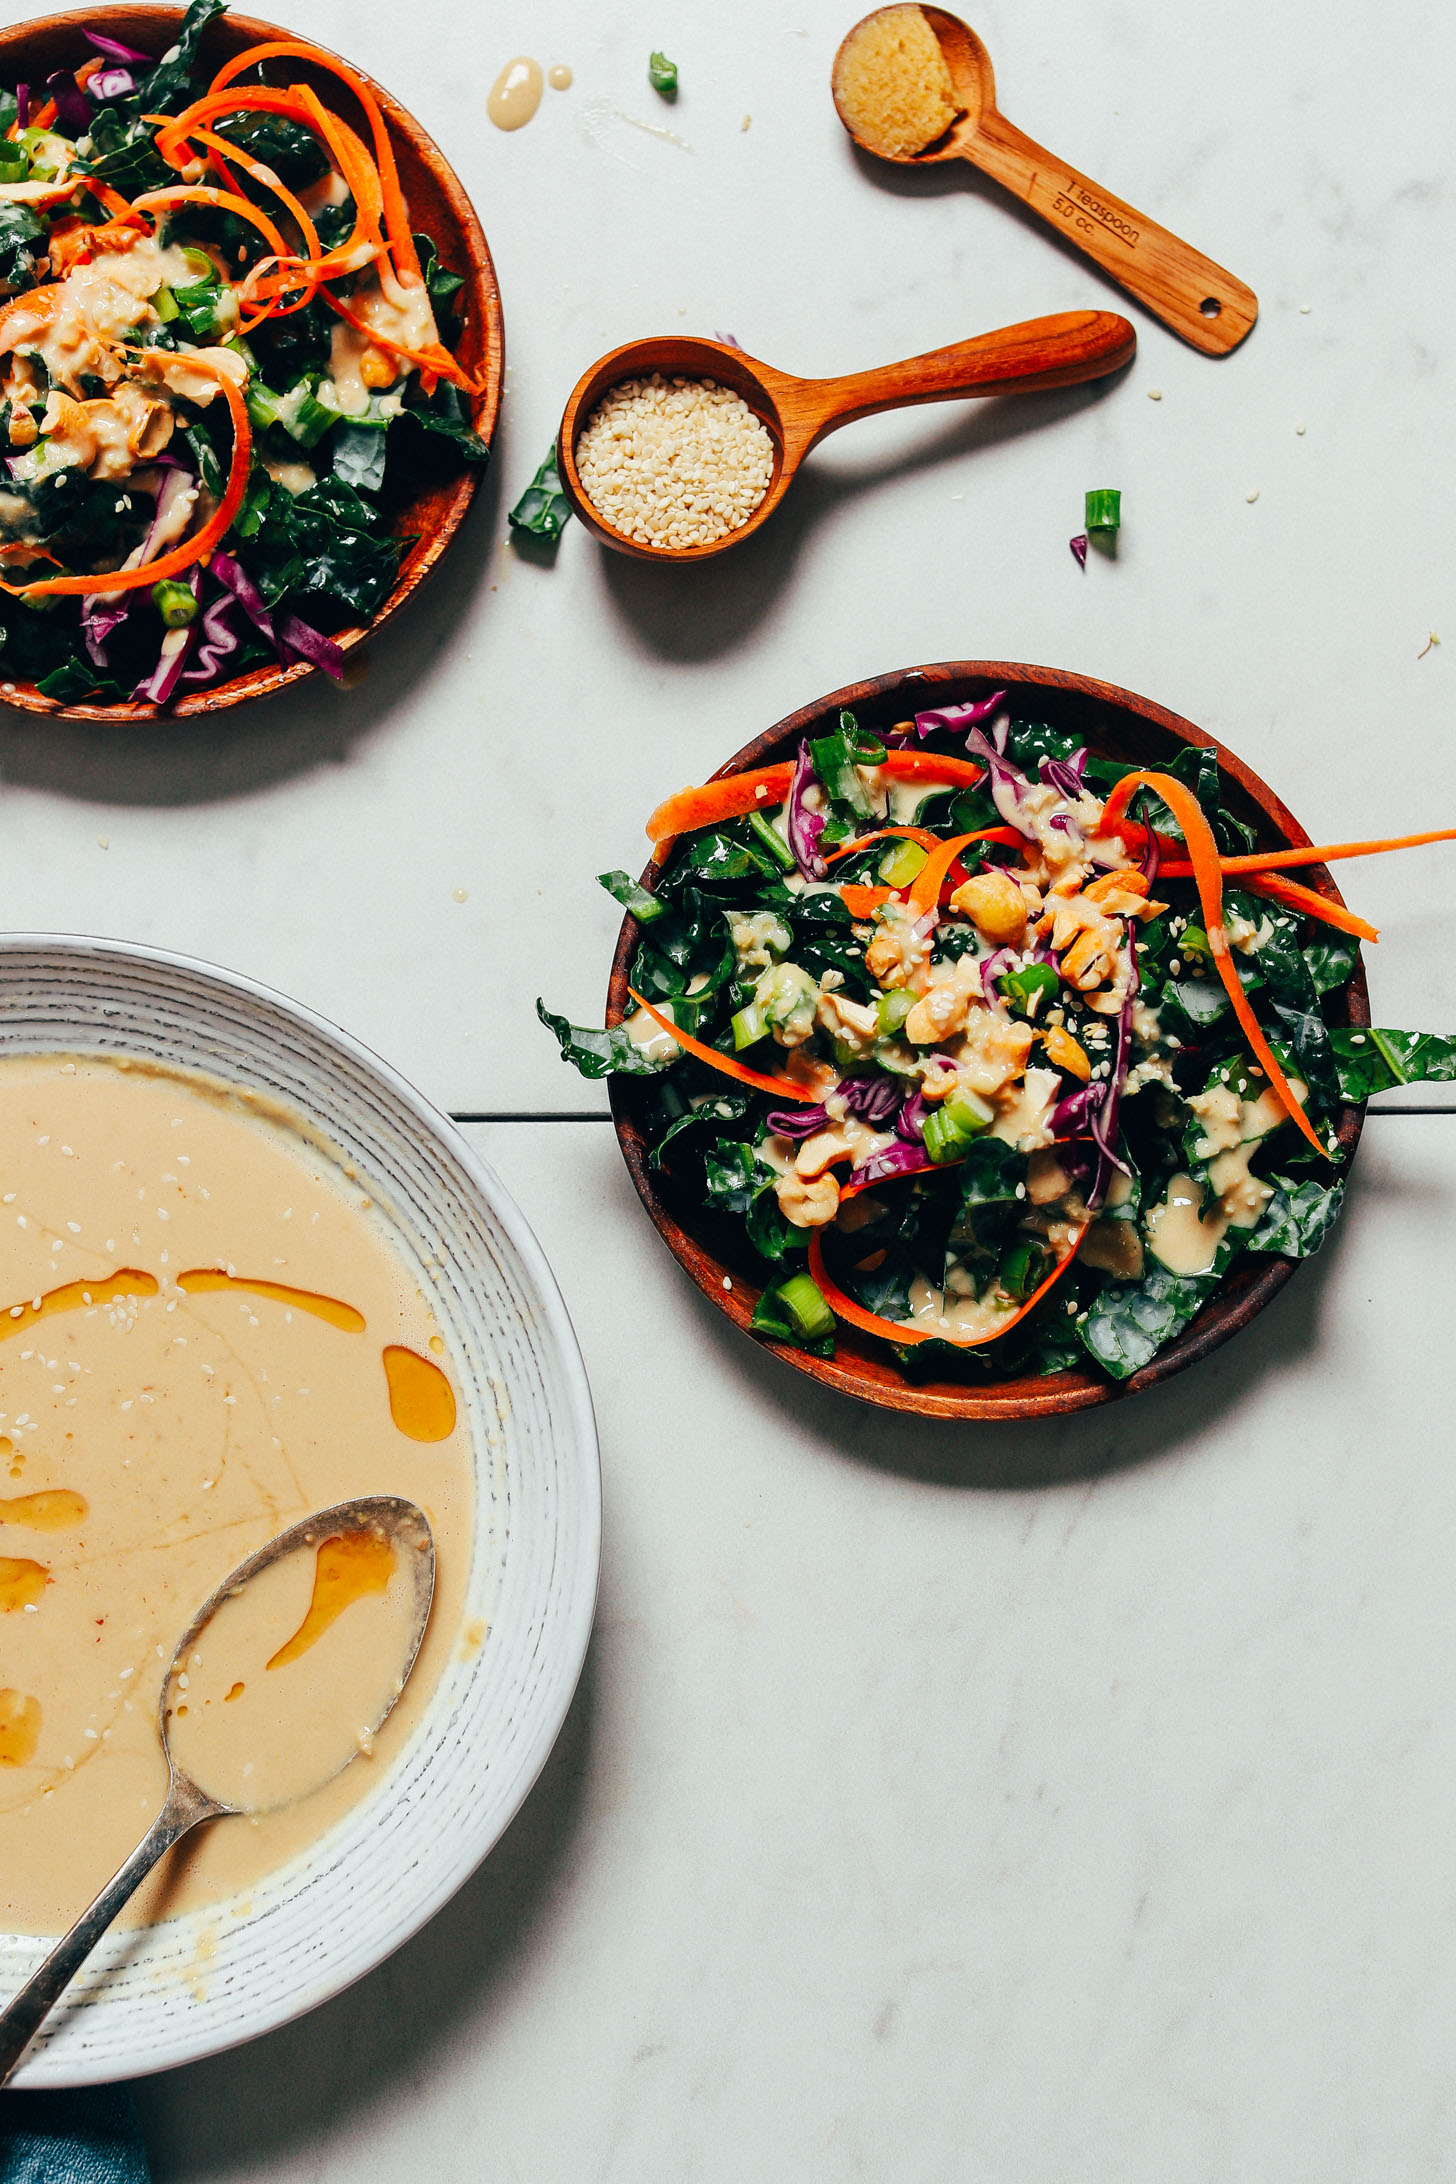 Plates of kale, carrot, and cabbage salad beside a bowl of our Ginger Garlic Miso Tahini Dressing